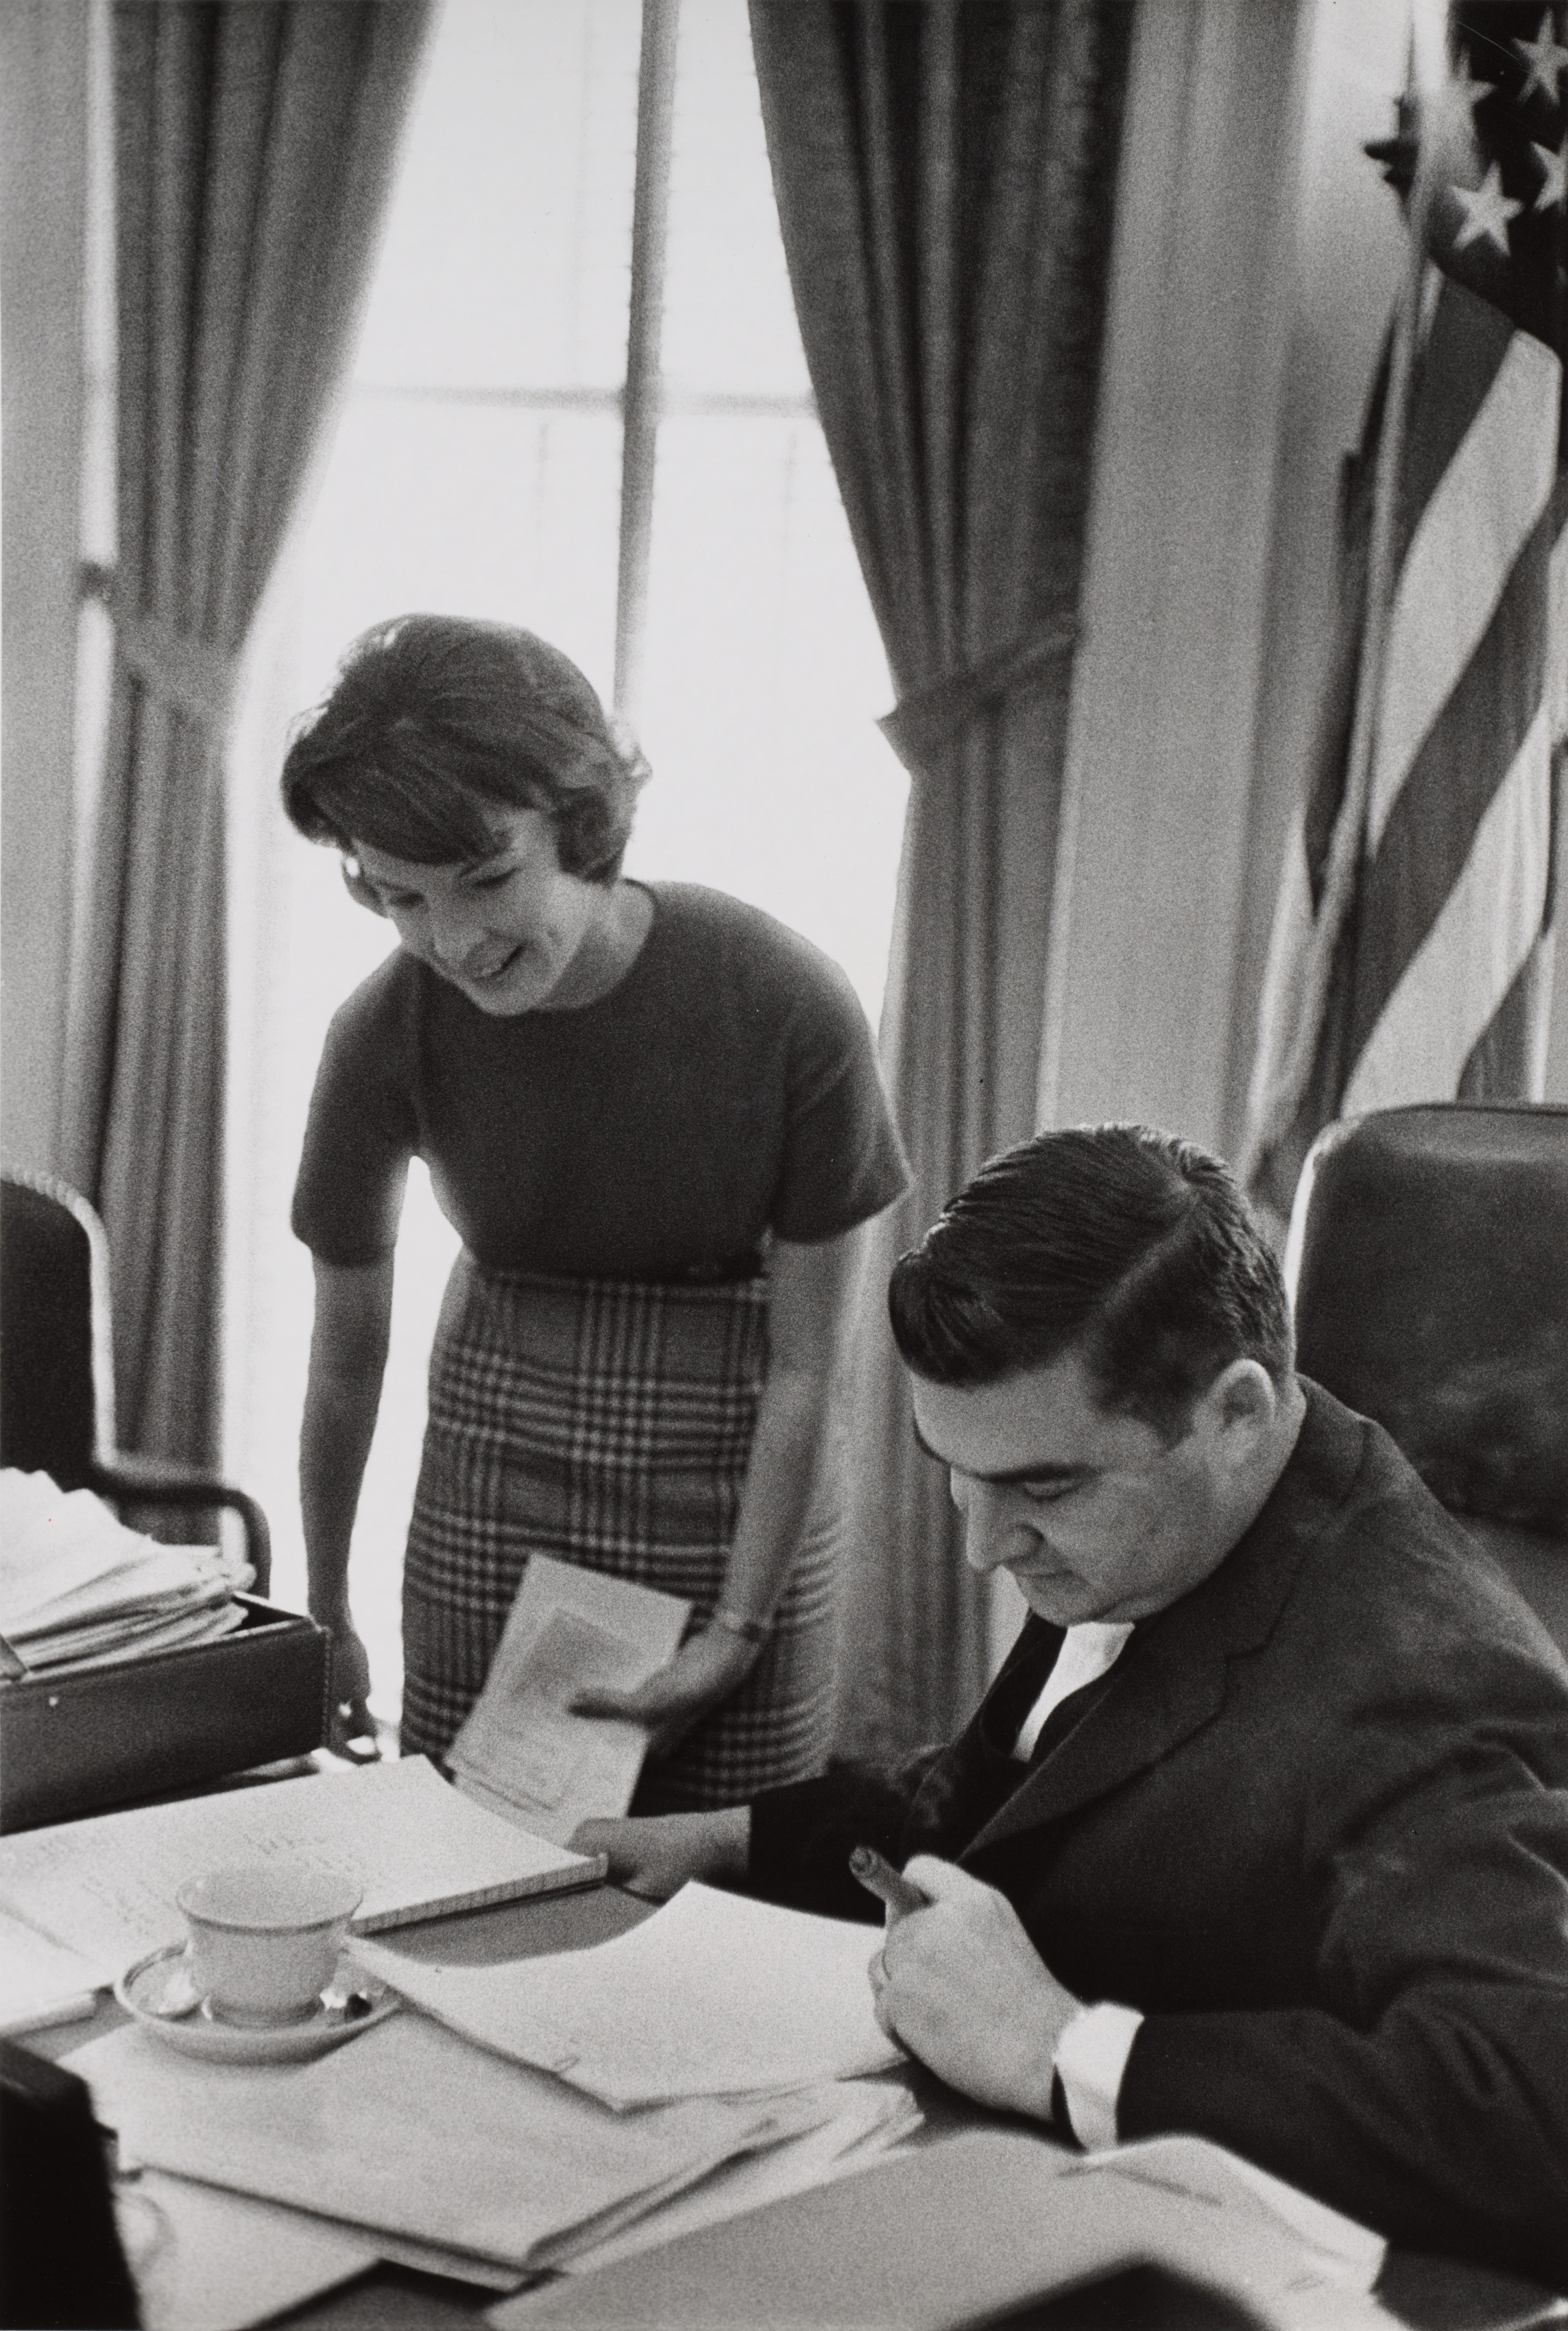 Press Secretary to the First Lady Pam Turnure and Press Secretary Pierre Salinger at a desk